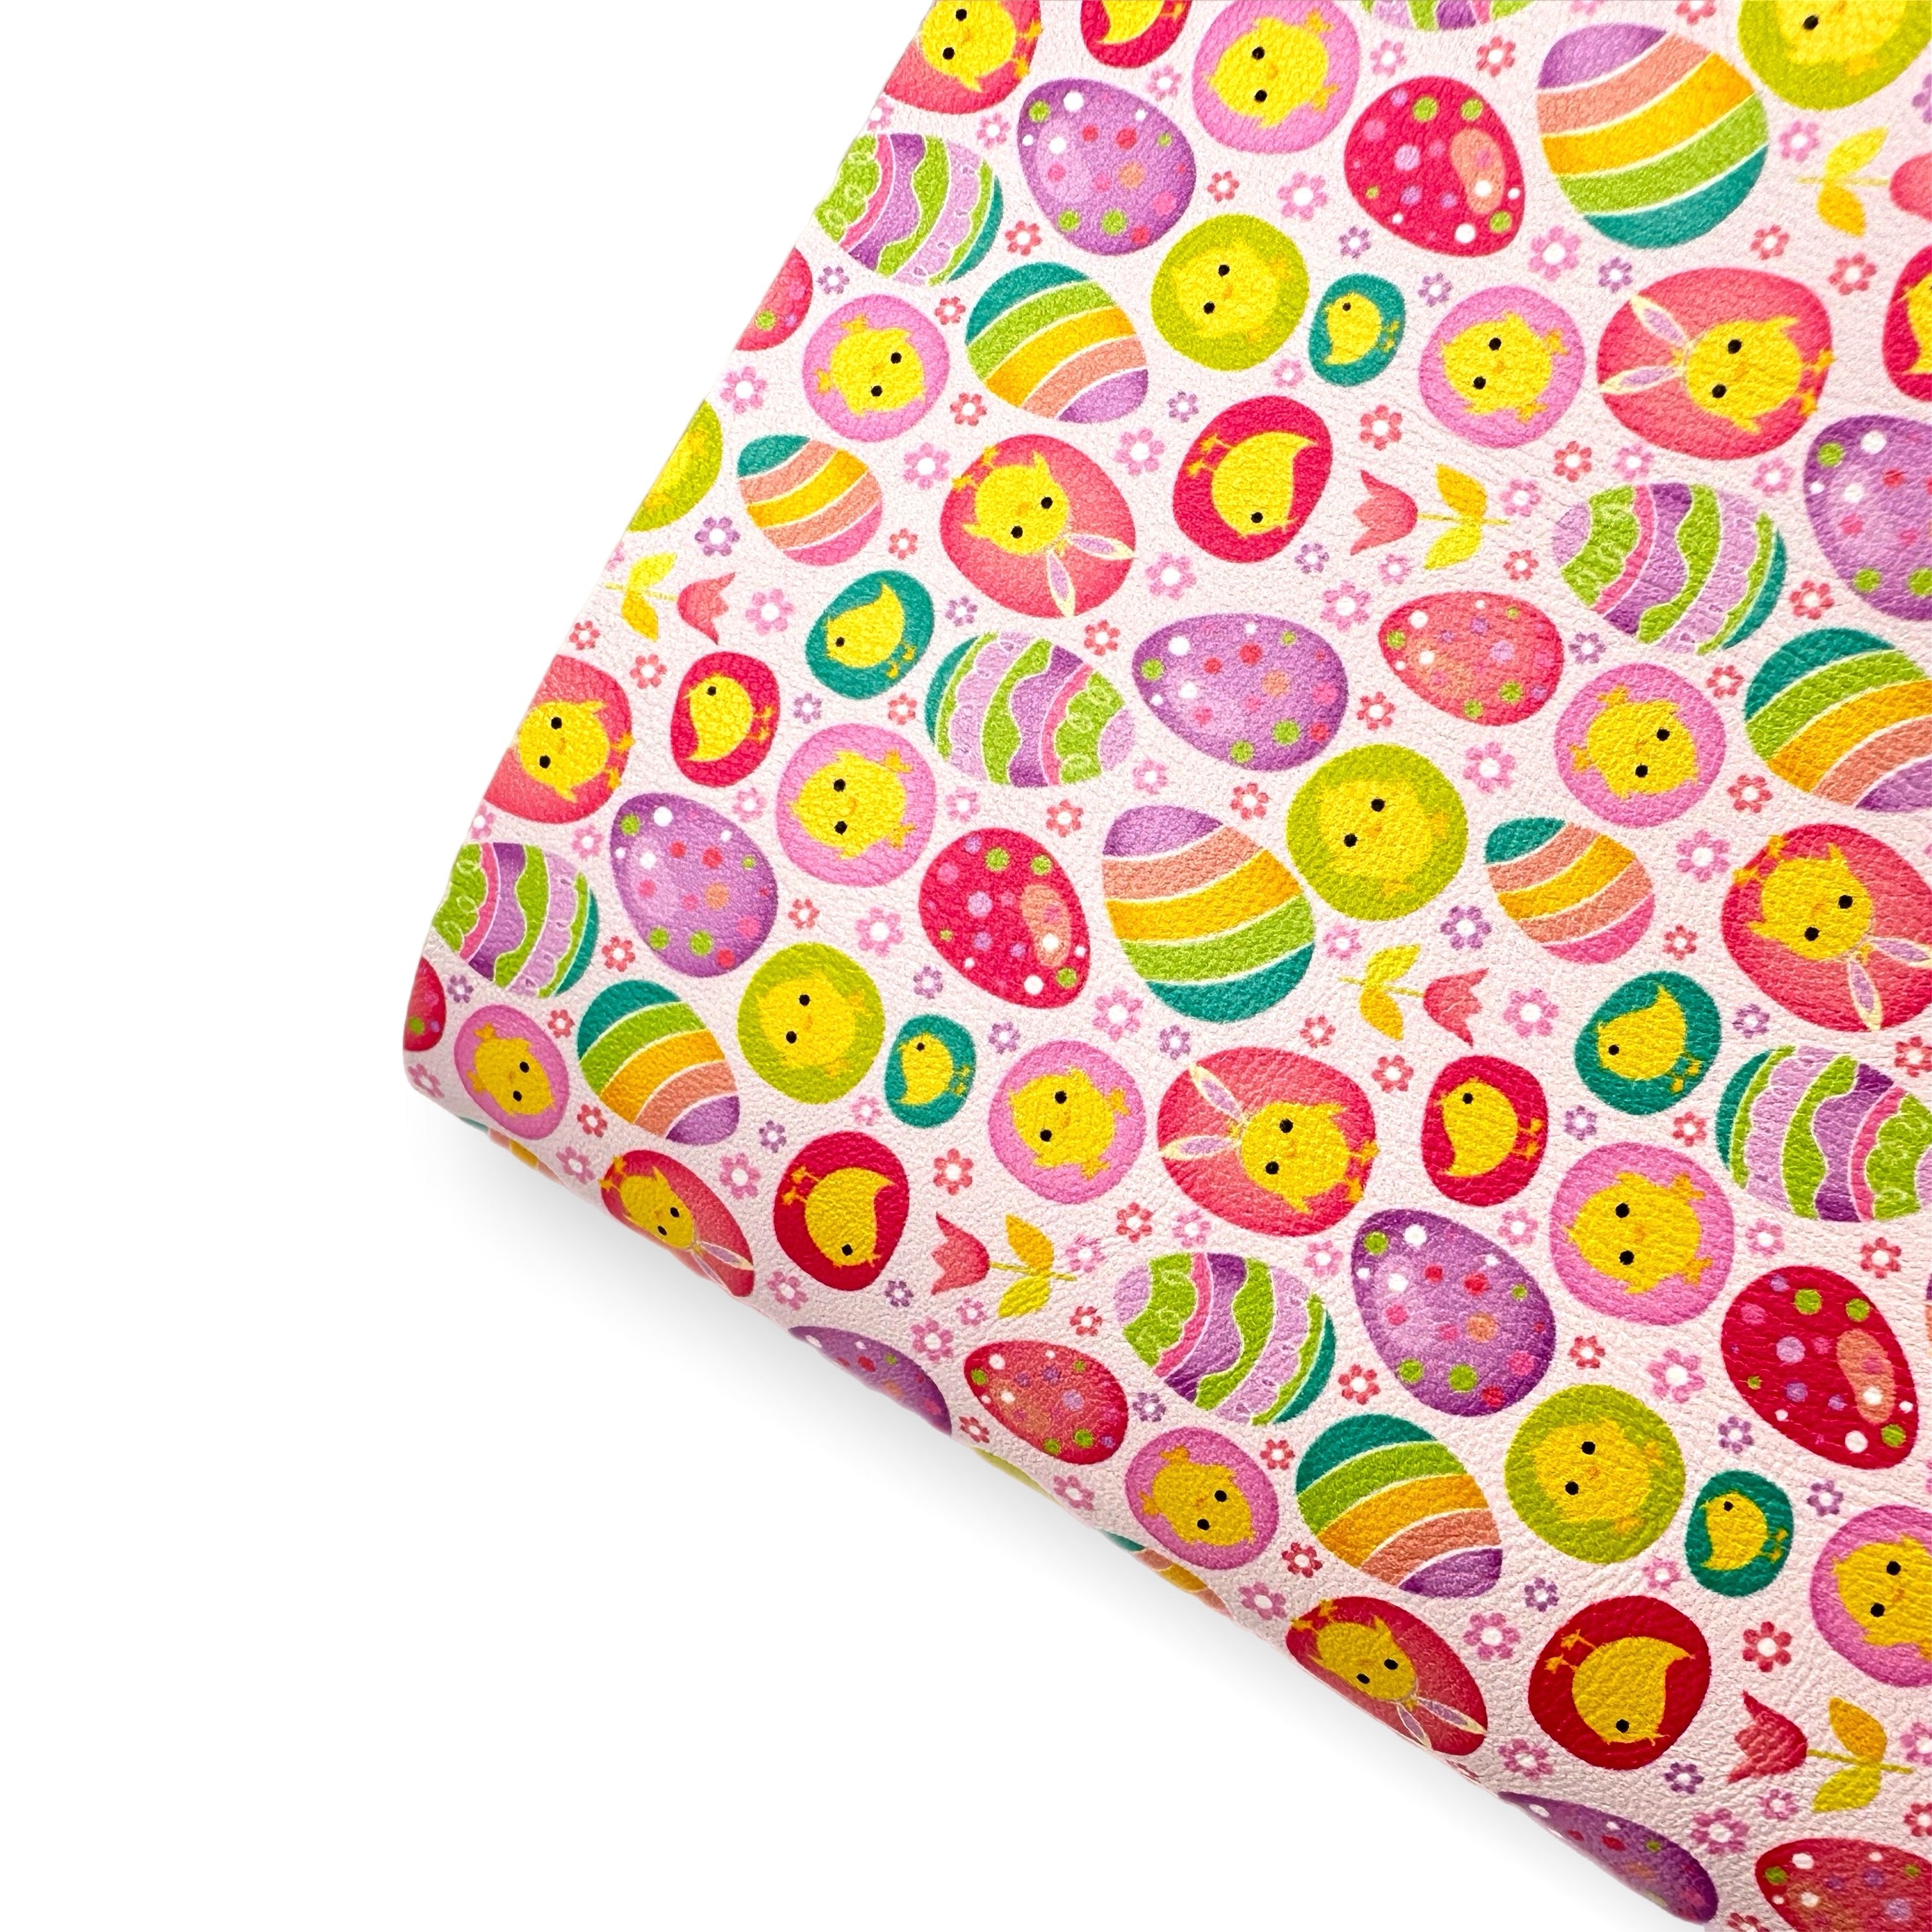 We're going on an Egg Hunt Premium Faux Leather Fabric